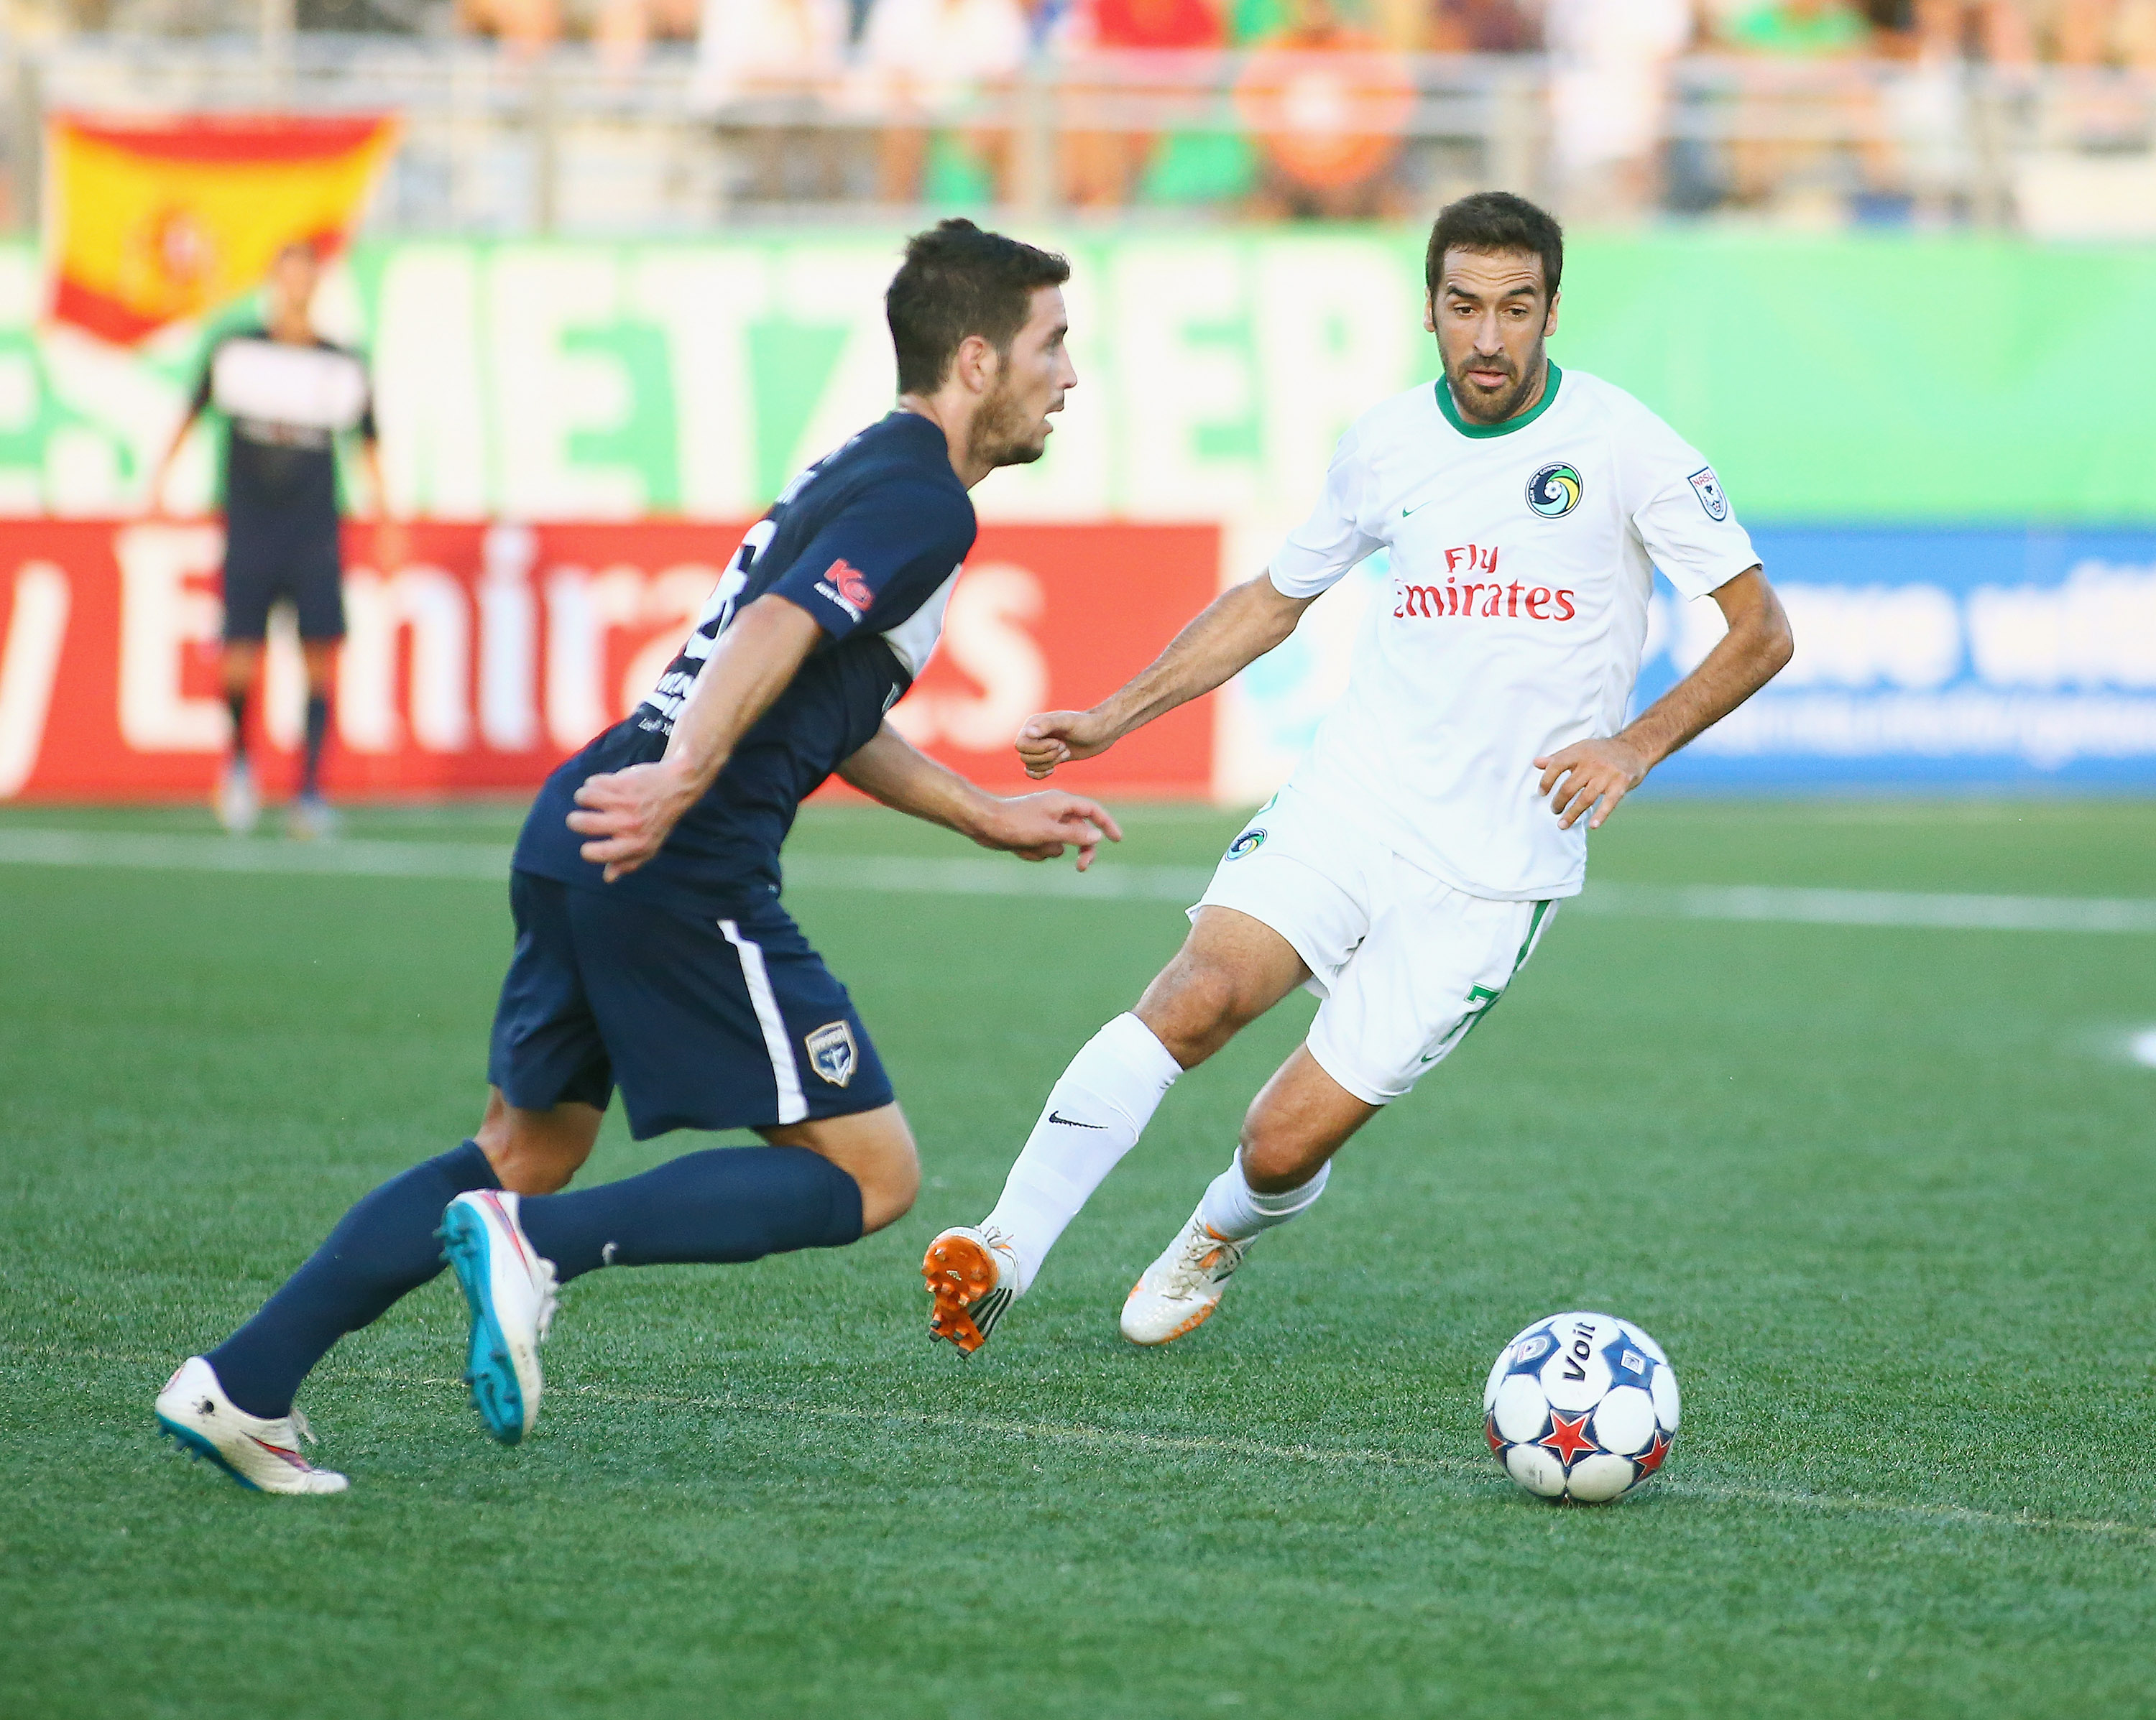 Raul & co. are looking to make a statement against the Bronx Blues.